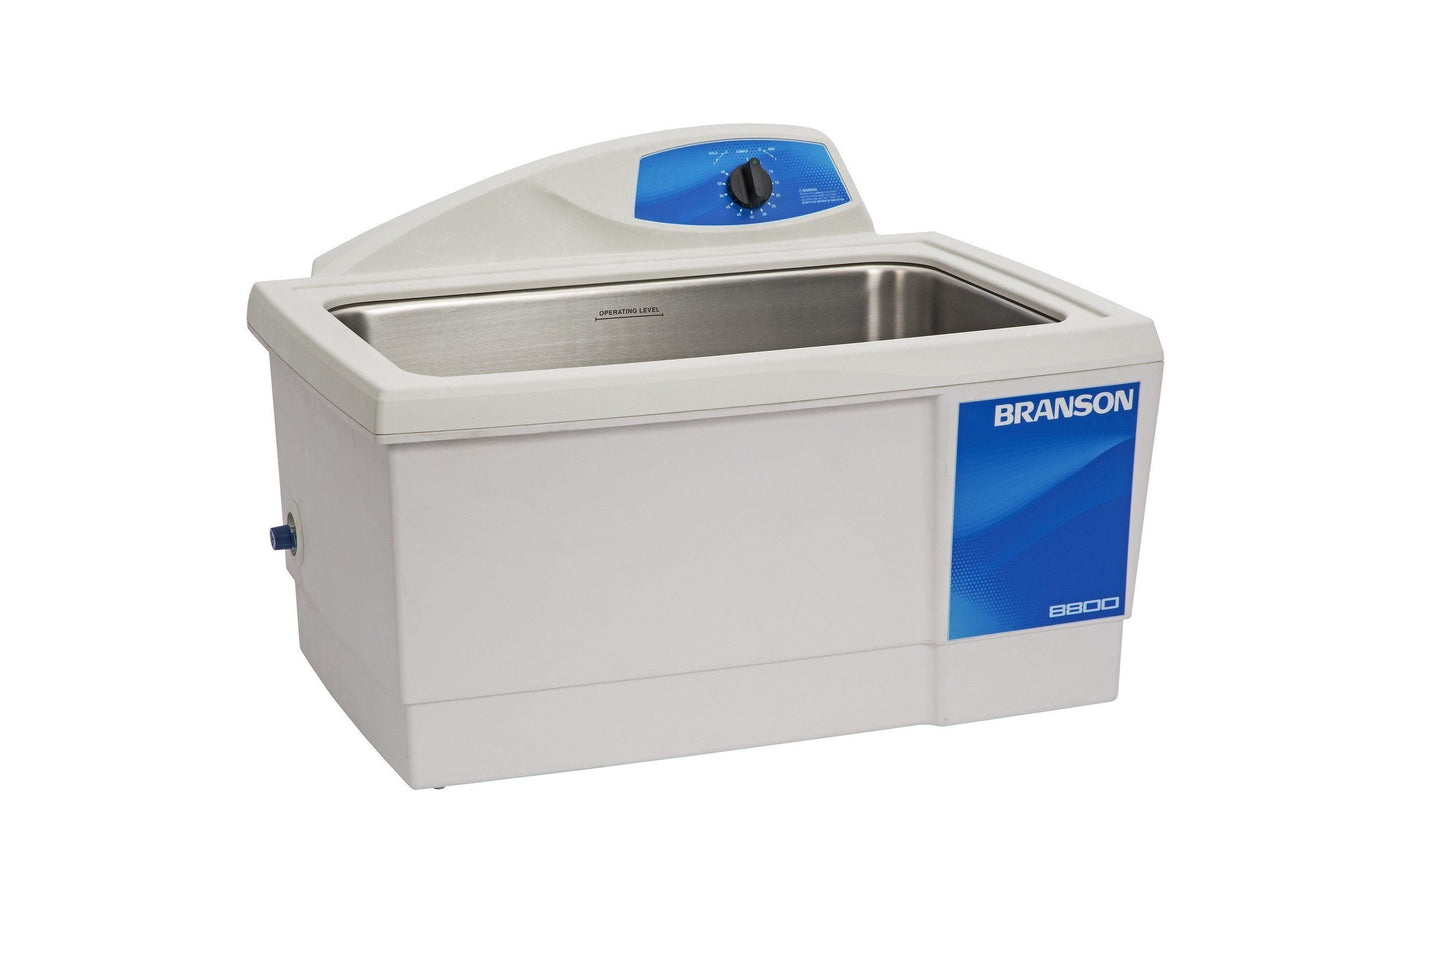 Branson M8800 Ultrasonic Cleaner with Mechanical Timer, 5.5 gallon - leadsonics